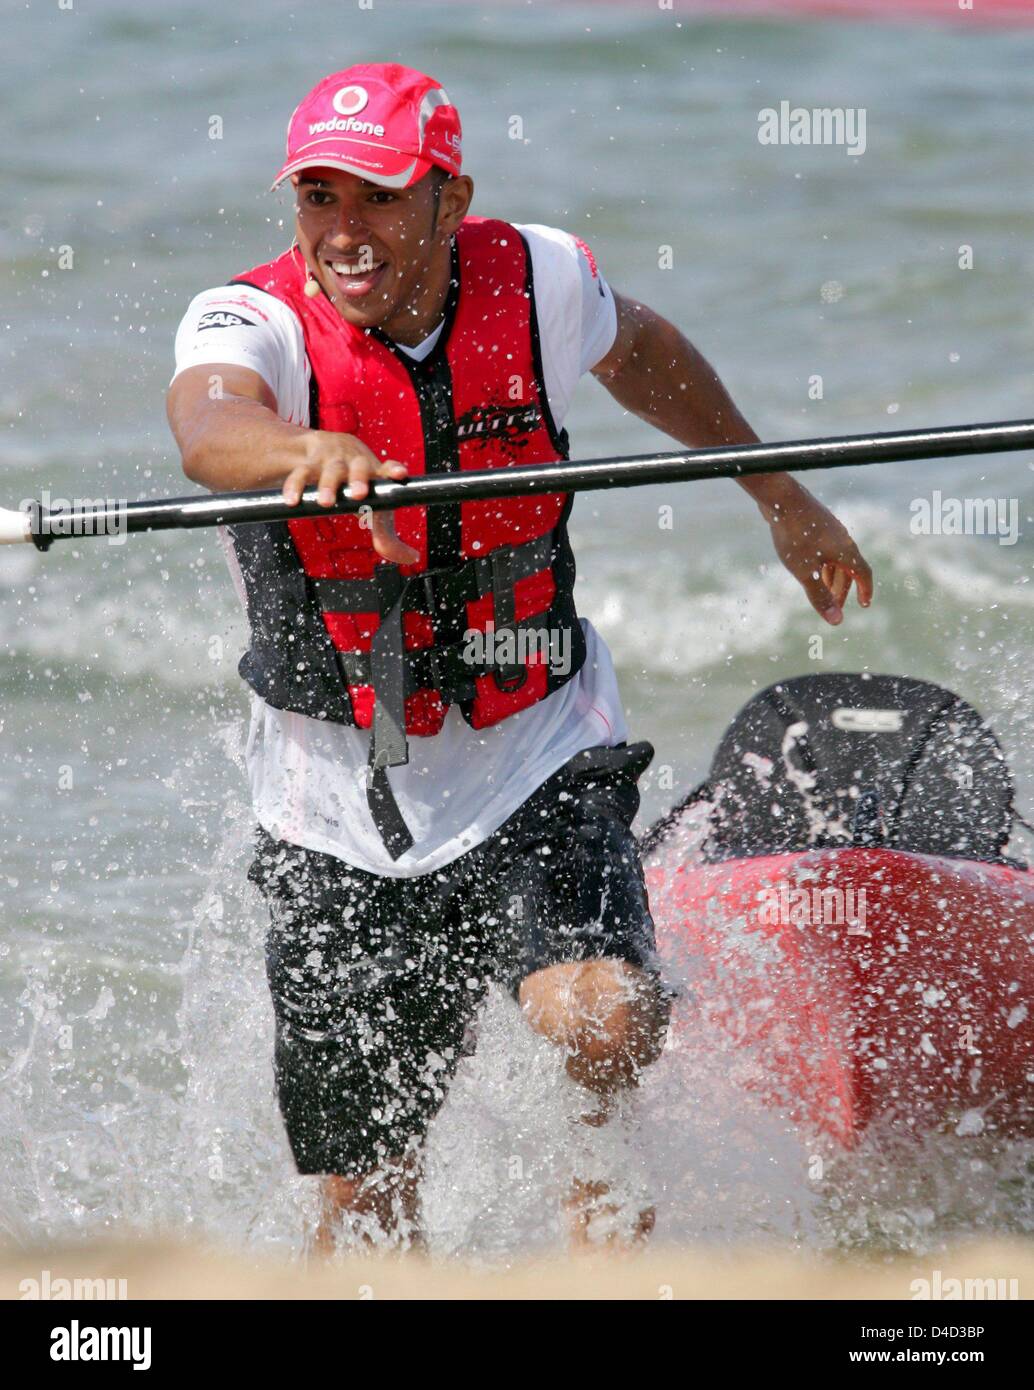 British Formula One driver Lewis Hamilton is pictured during a beach kayak event in Melbourne, Australia, 12 March 2008. The Australian Formula One Grand Prix will take place at Albert Park Circuit in Melbourne on Sunday 16 March. Photo: ROLAND WEIHRAUCH Stock Photo